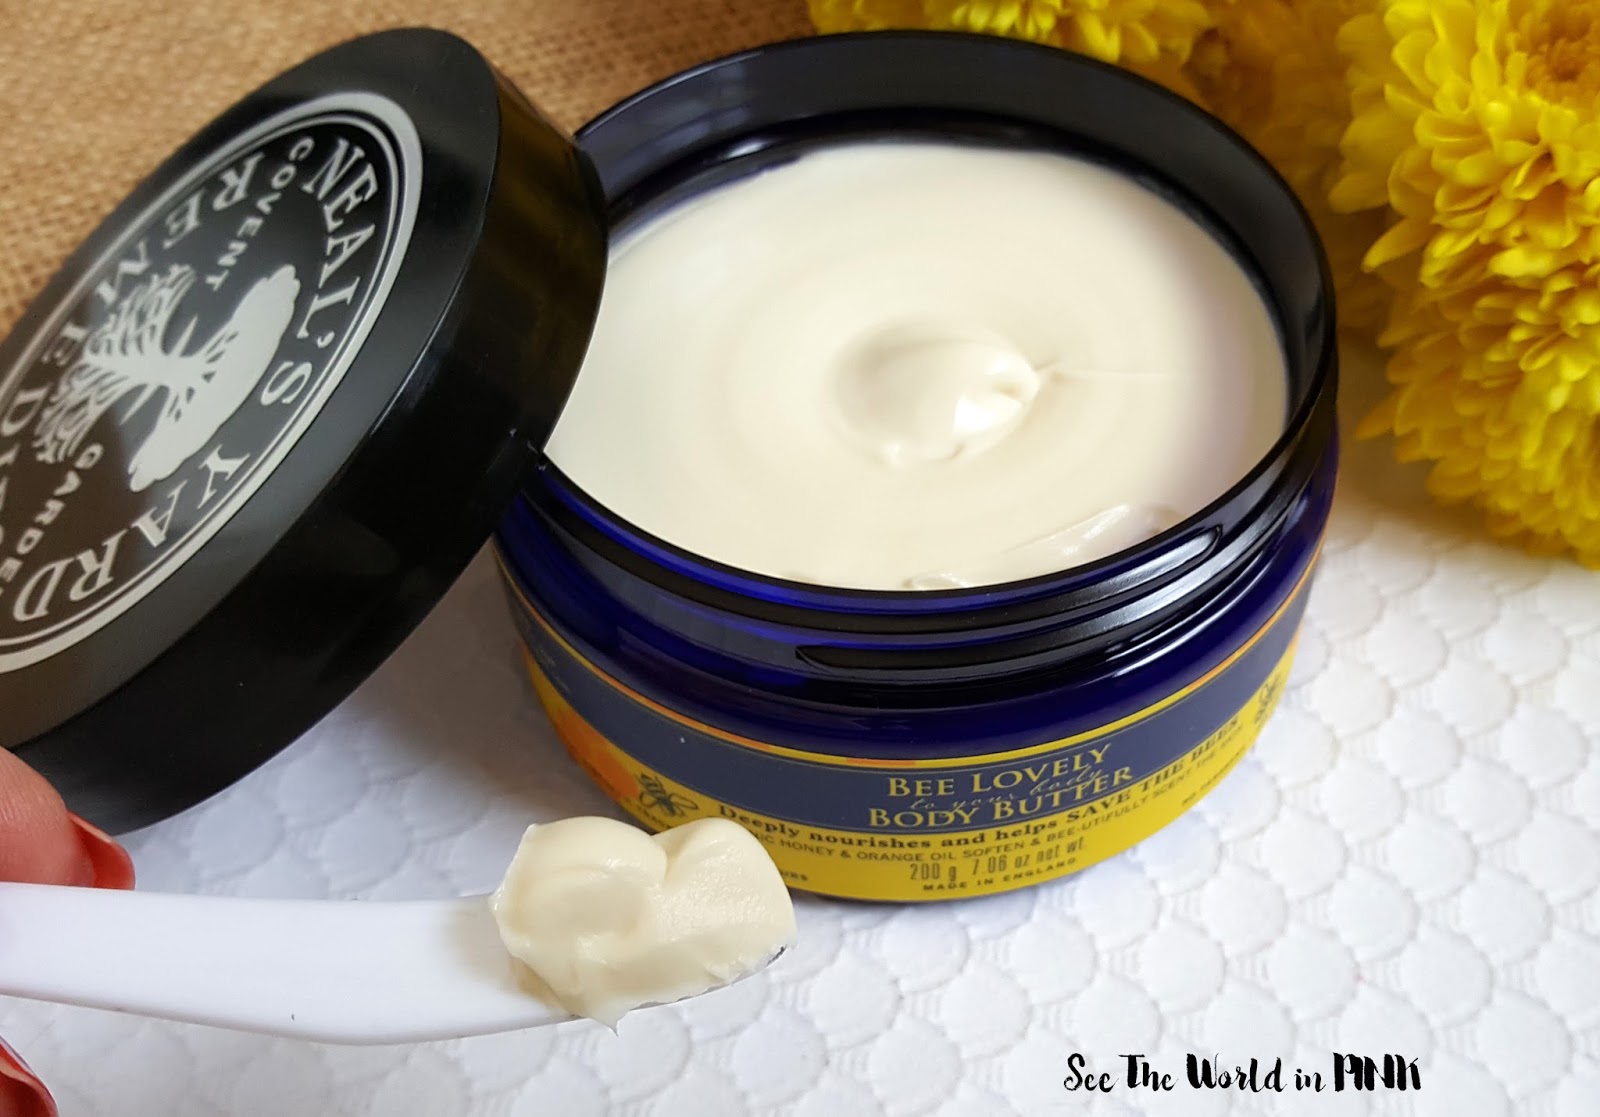 Skincare Sunday - Neal's Yard Remedies Bee Lovely Body Butter Review 